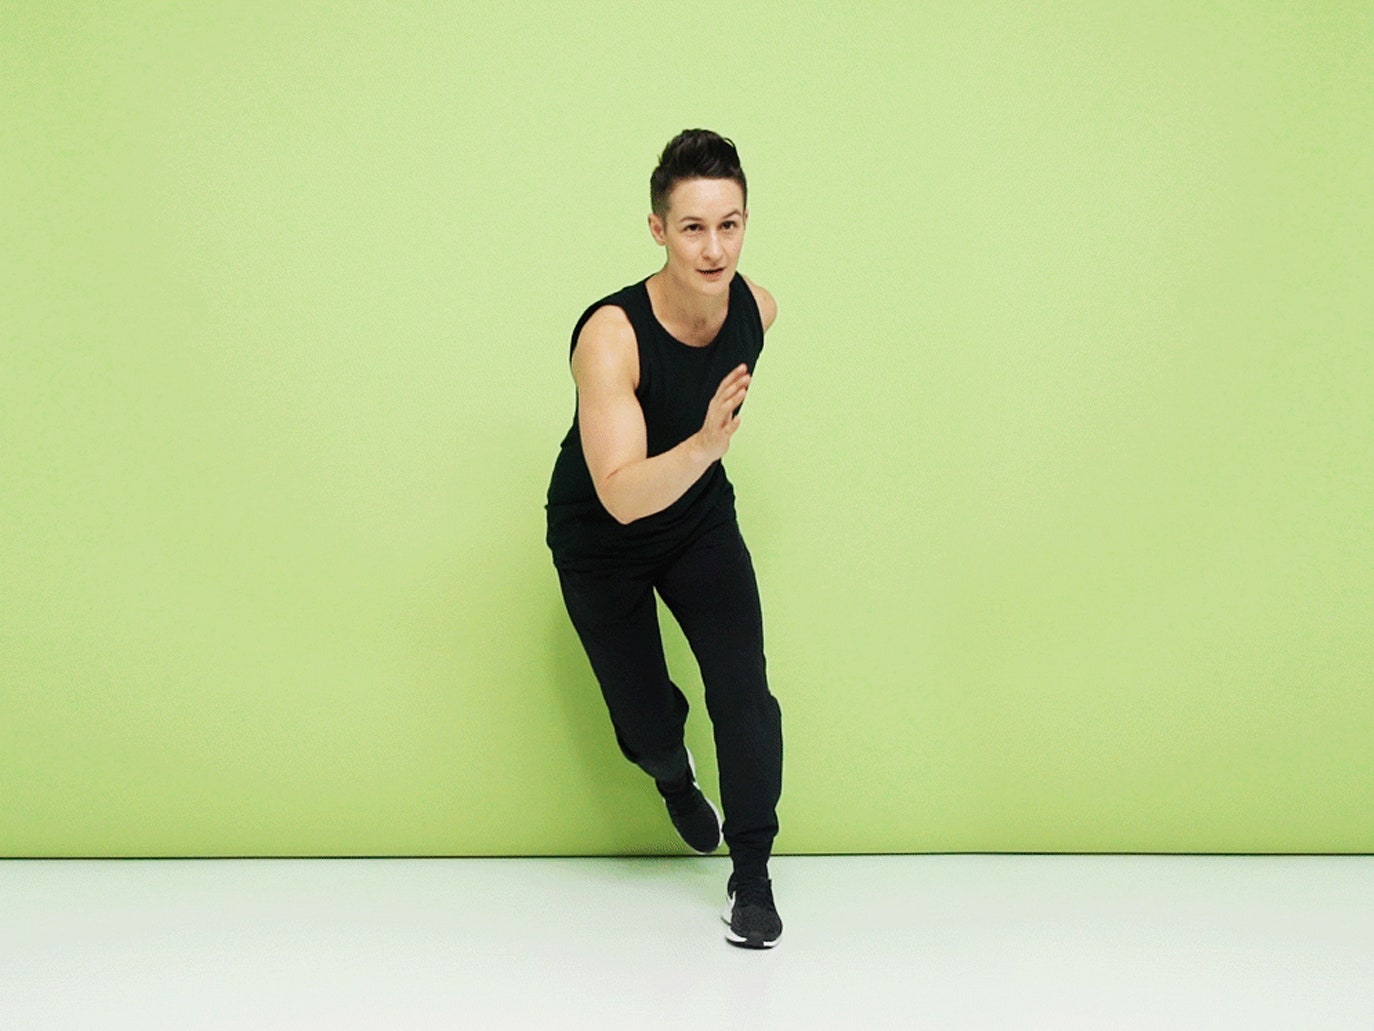 This HIIT Leg Exercise Will Double as Your Cardio